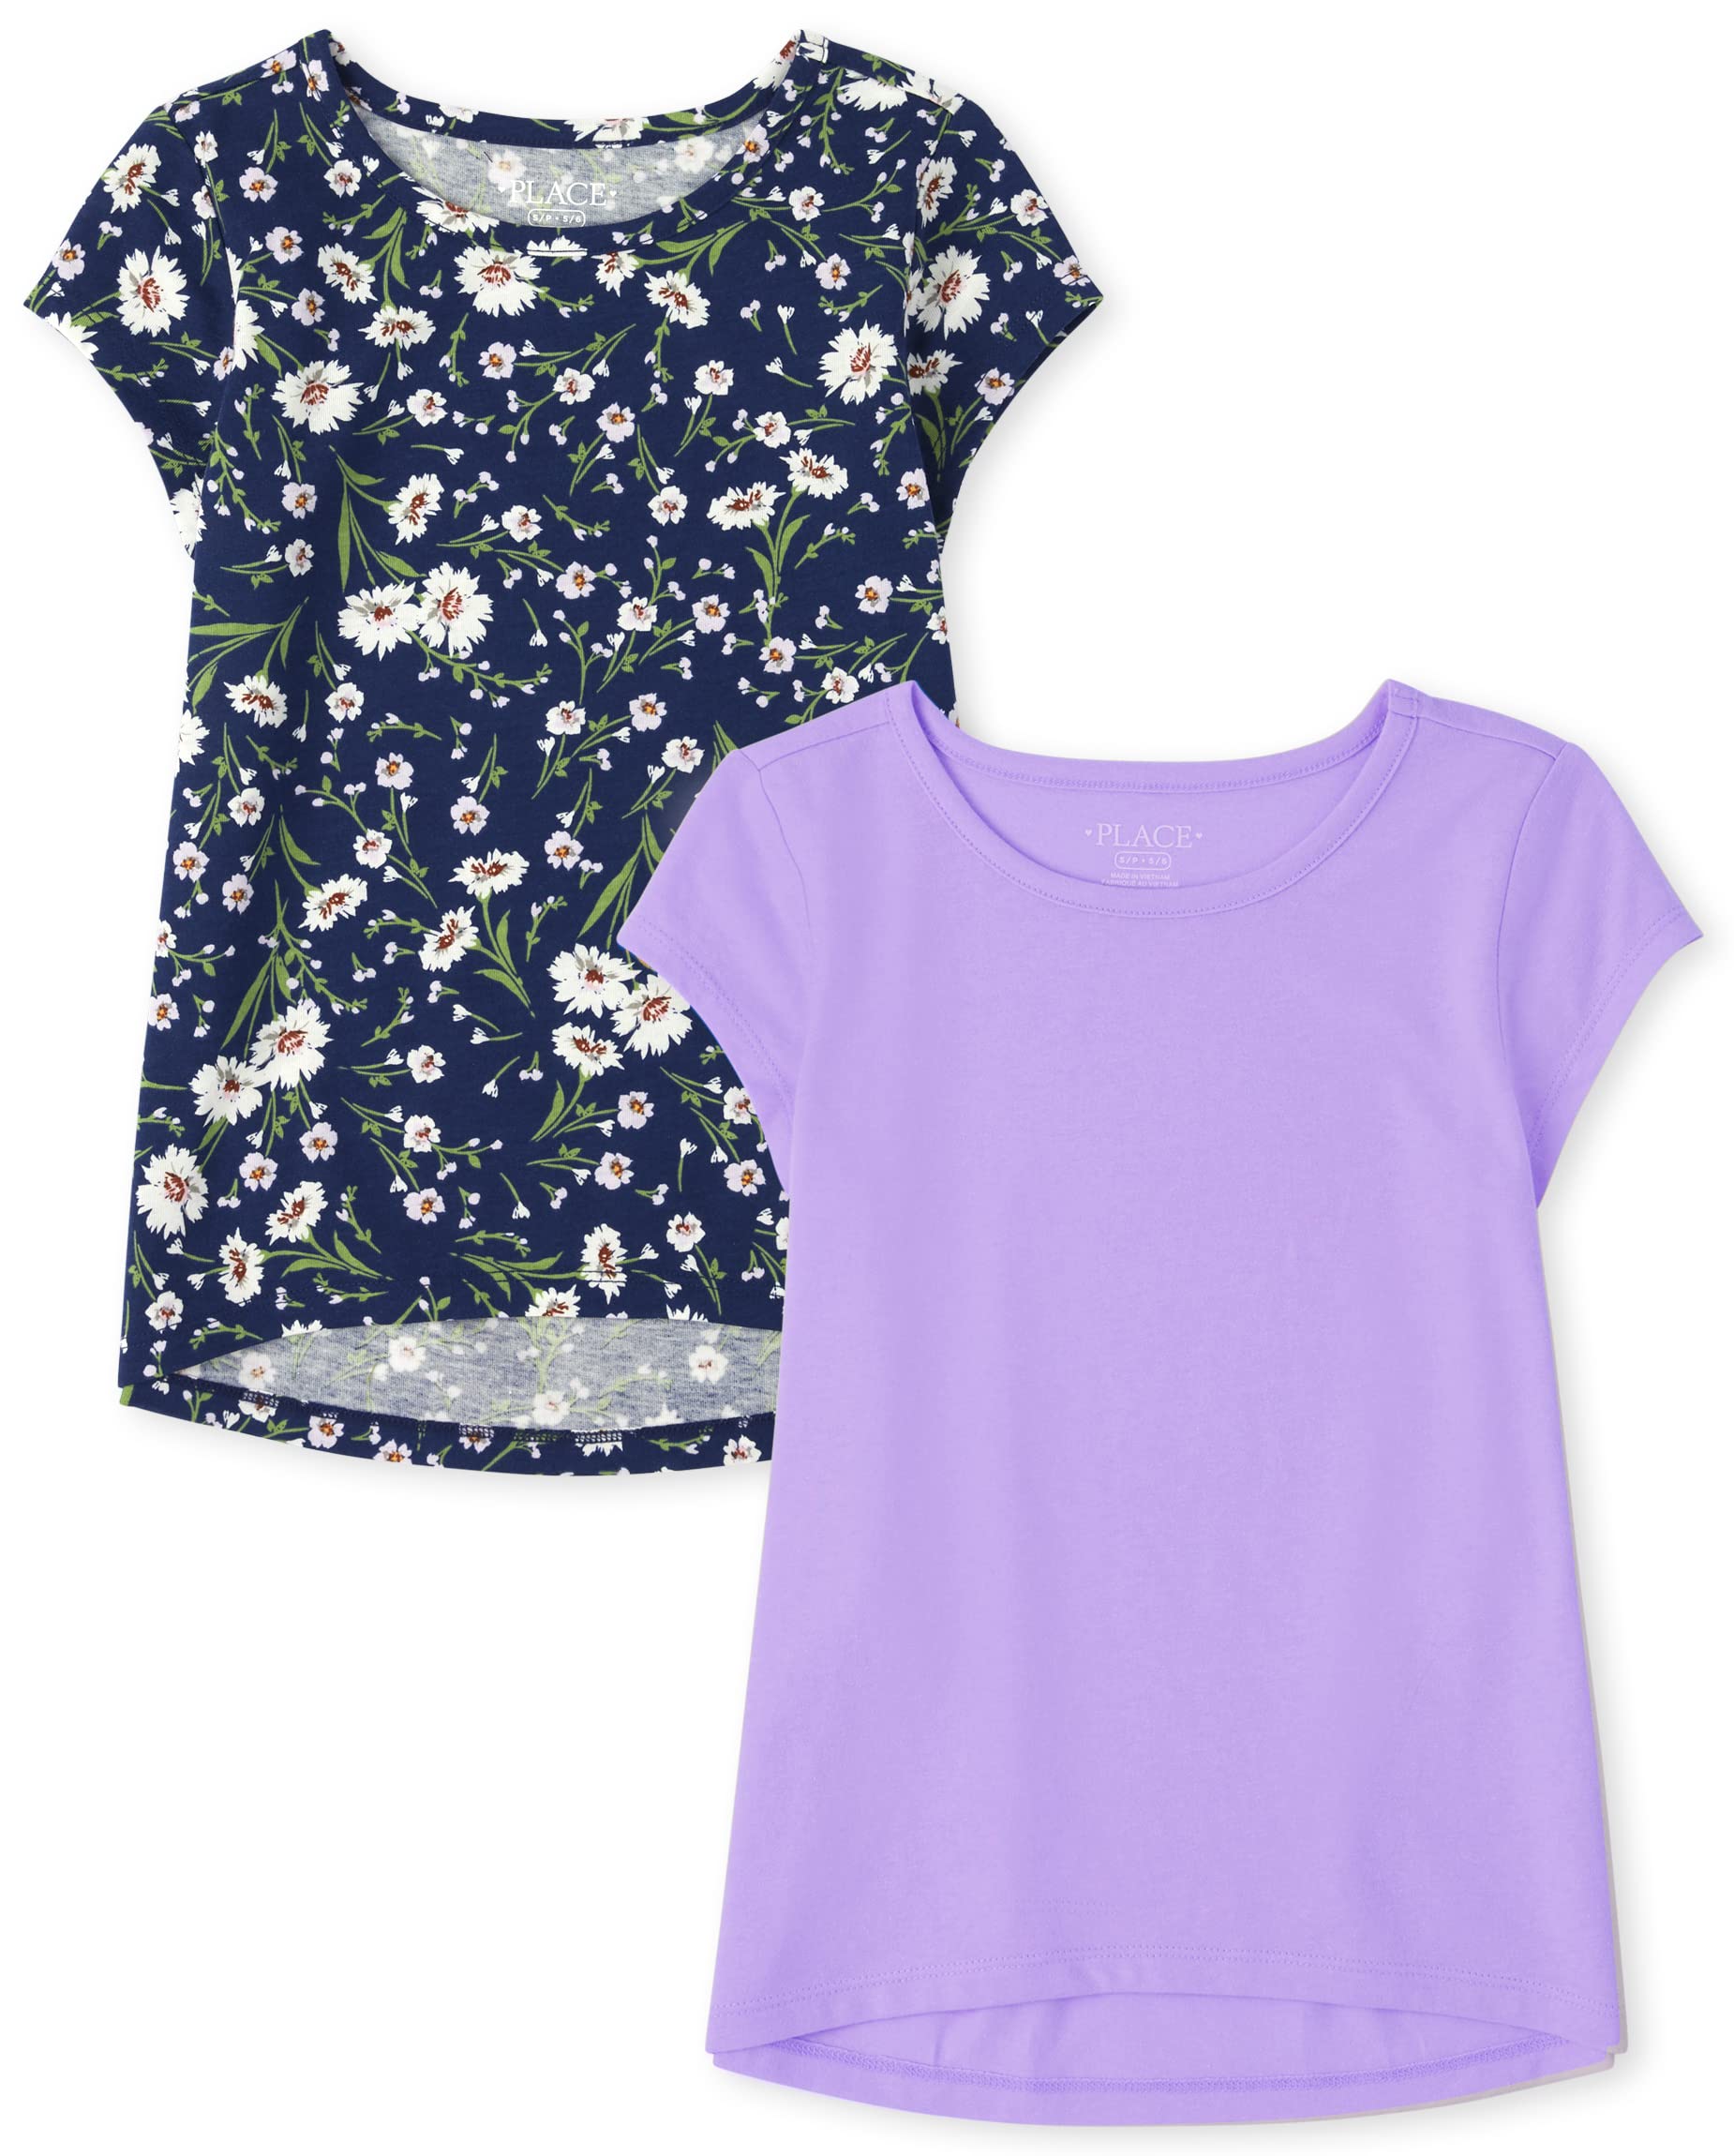 The Children's Place Girls Print Basic Layering Tees